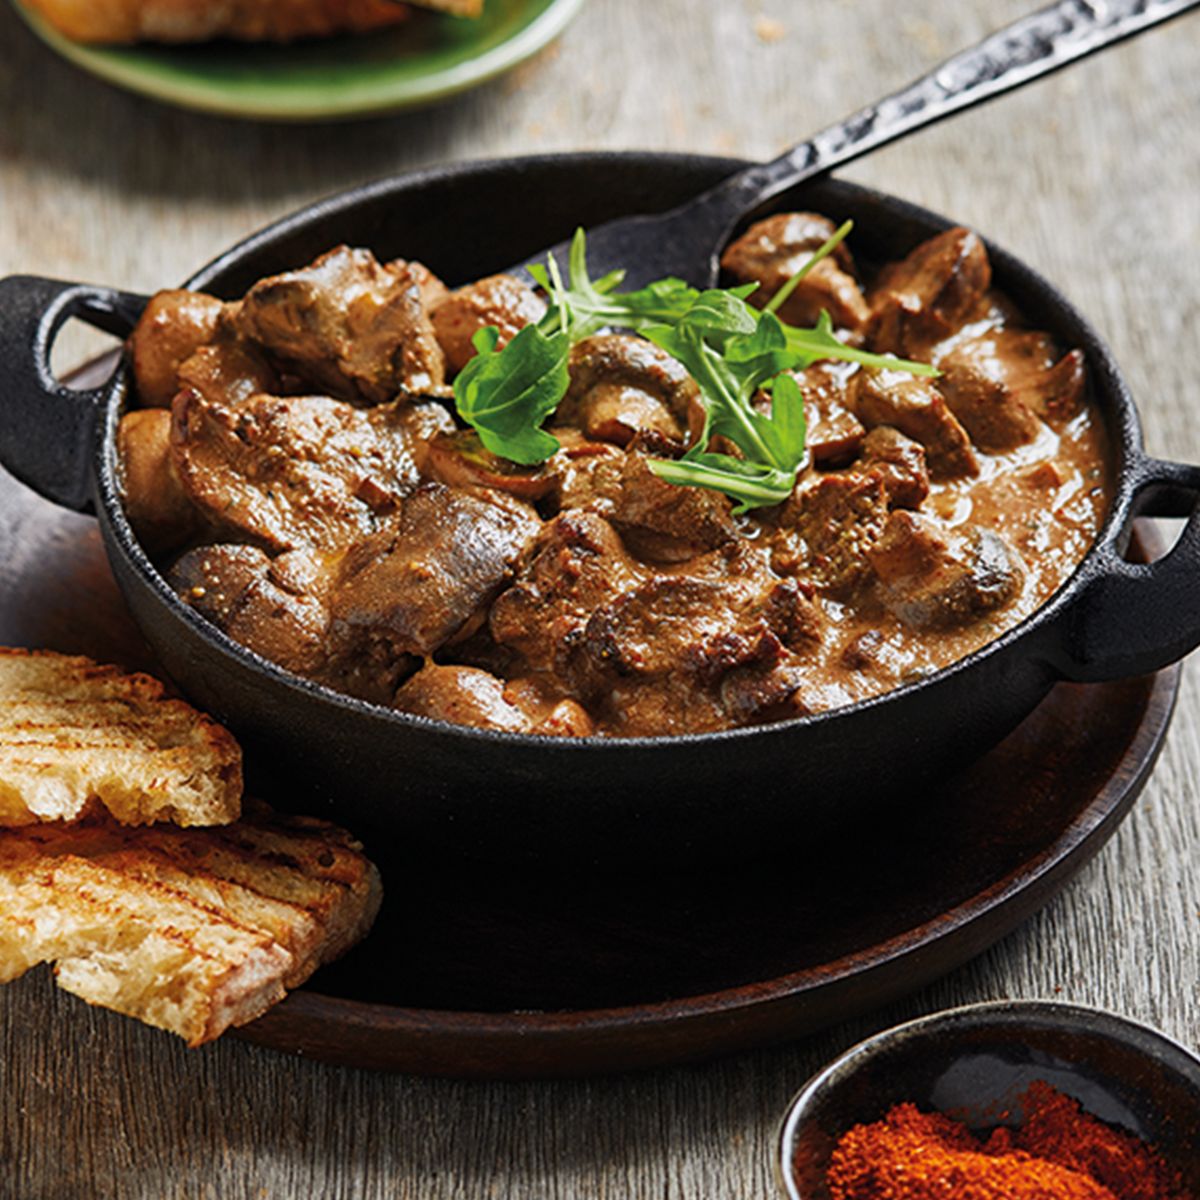 Cook A Hearty Chicken Liver Meal For Your Family | whatsfordinner